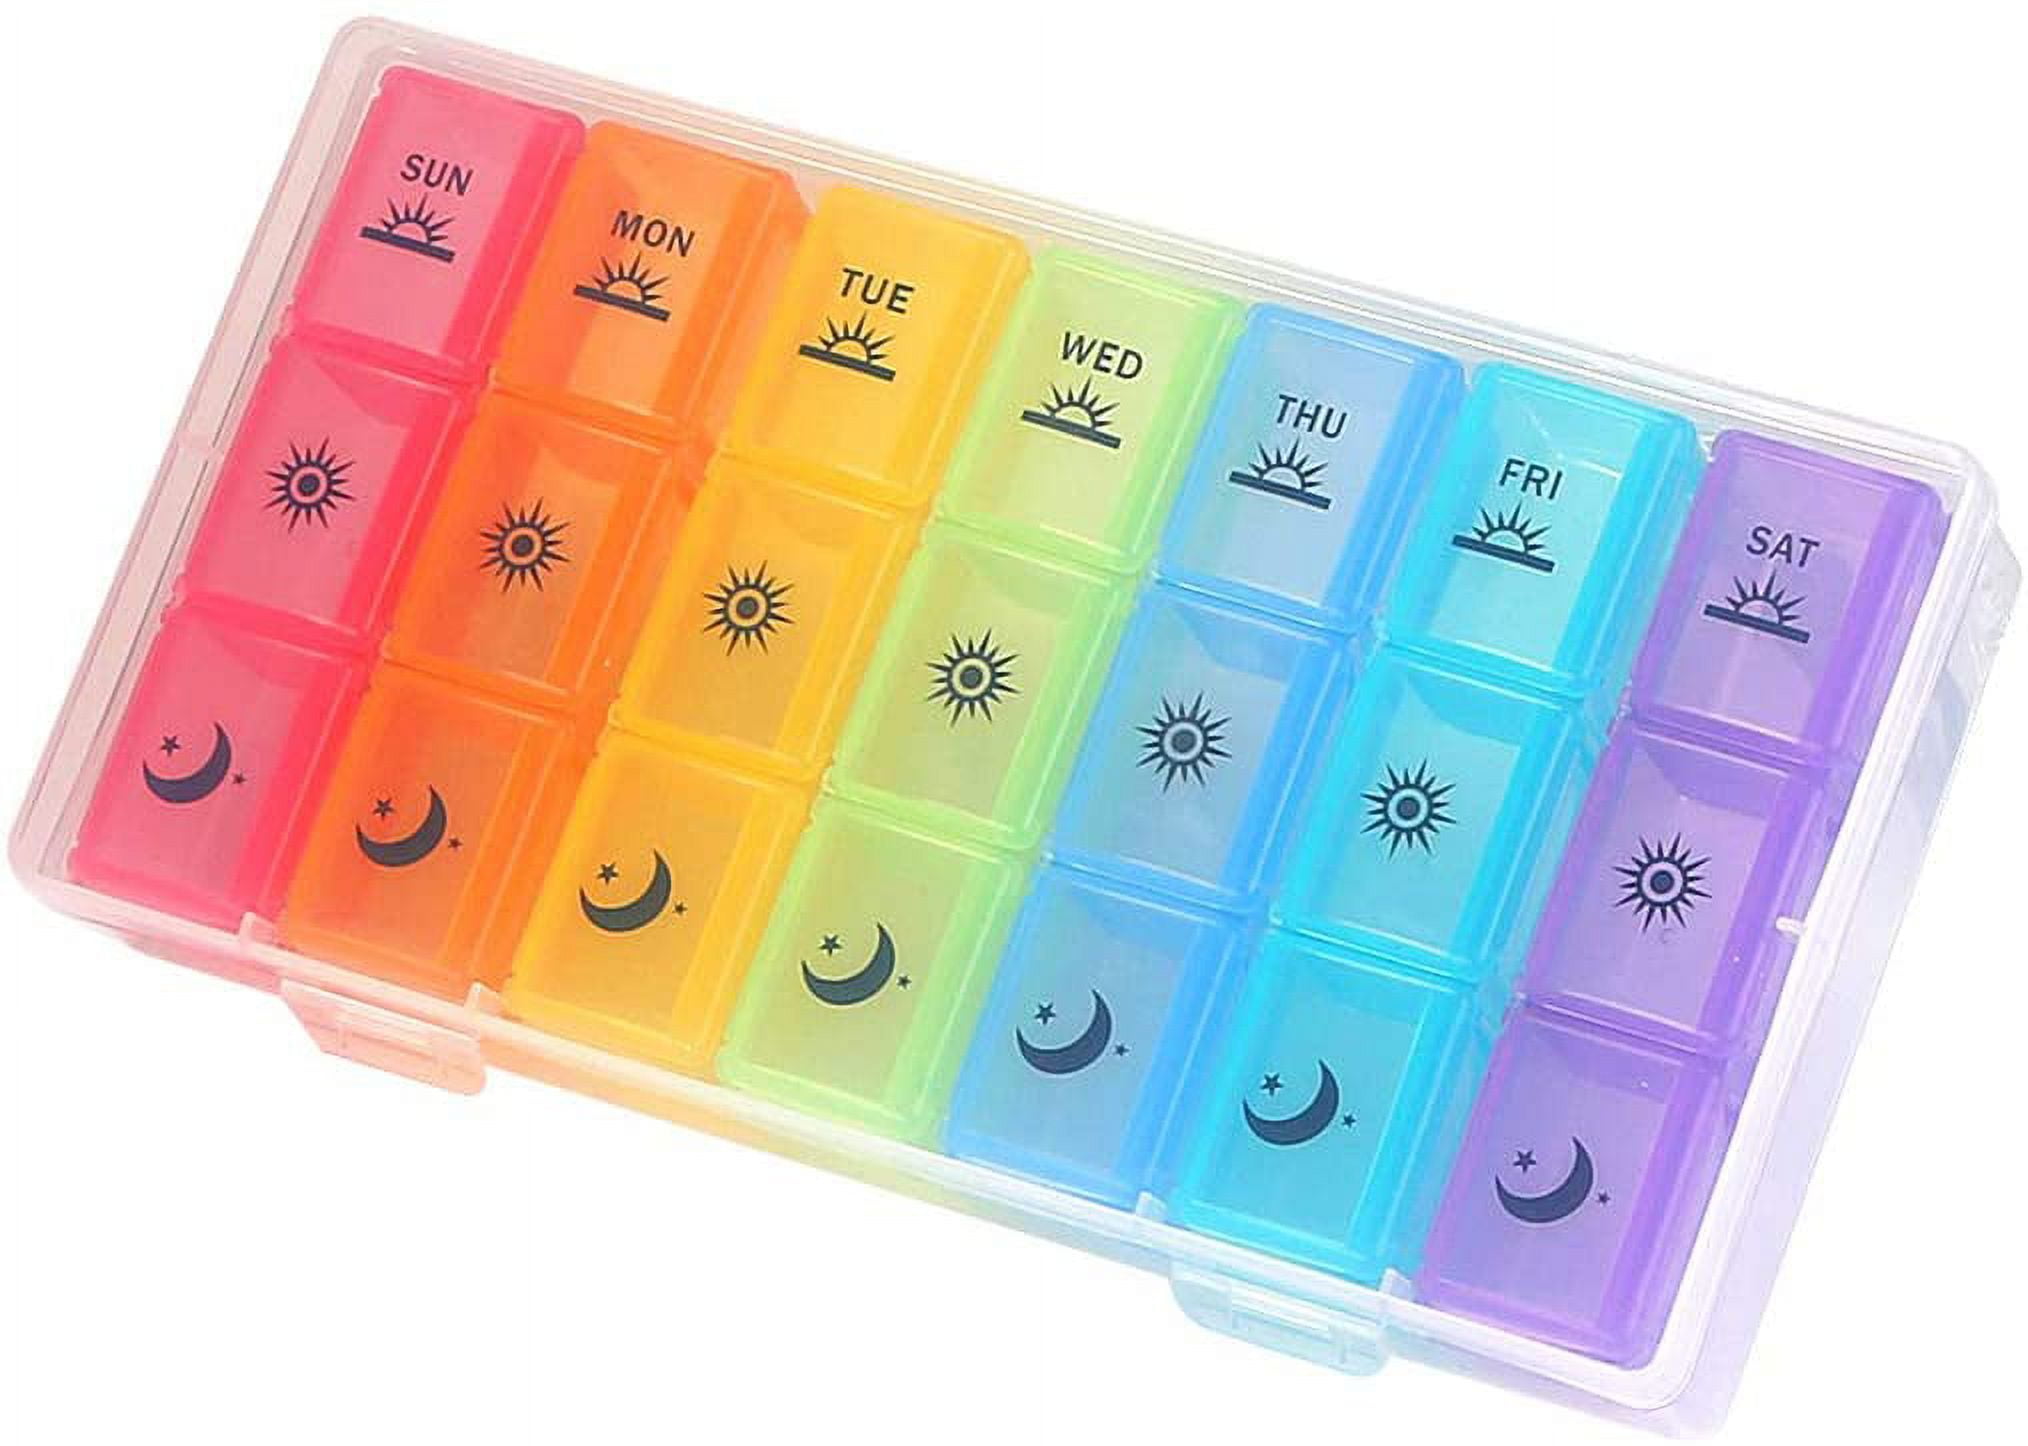  INVODA Pill Cases Pill Box Weekly 3 Times 7